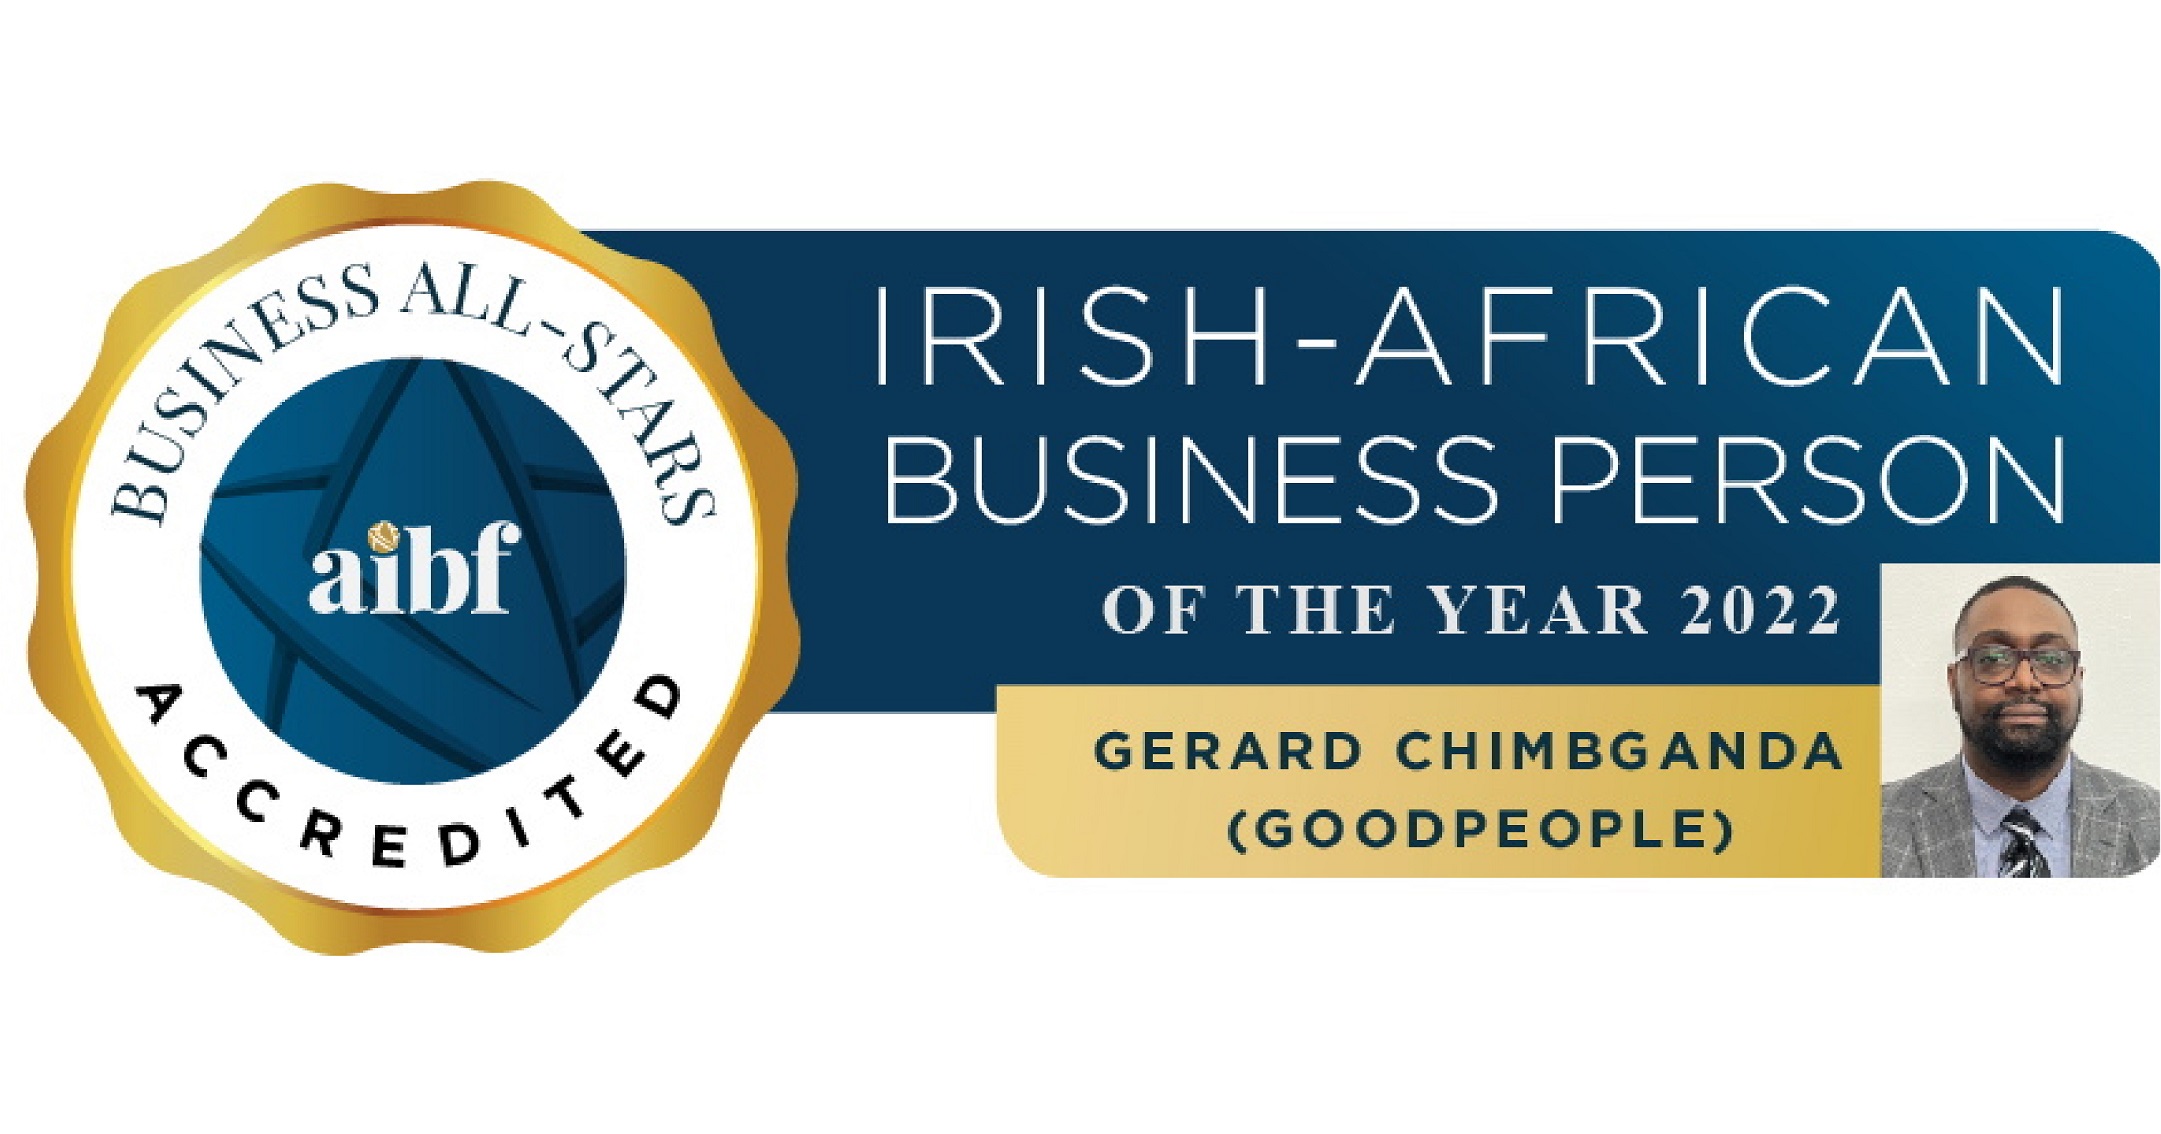 Gerard Chimbganda Named All-Star Irish-African Business Person Of The Year 2022